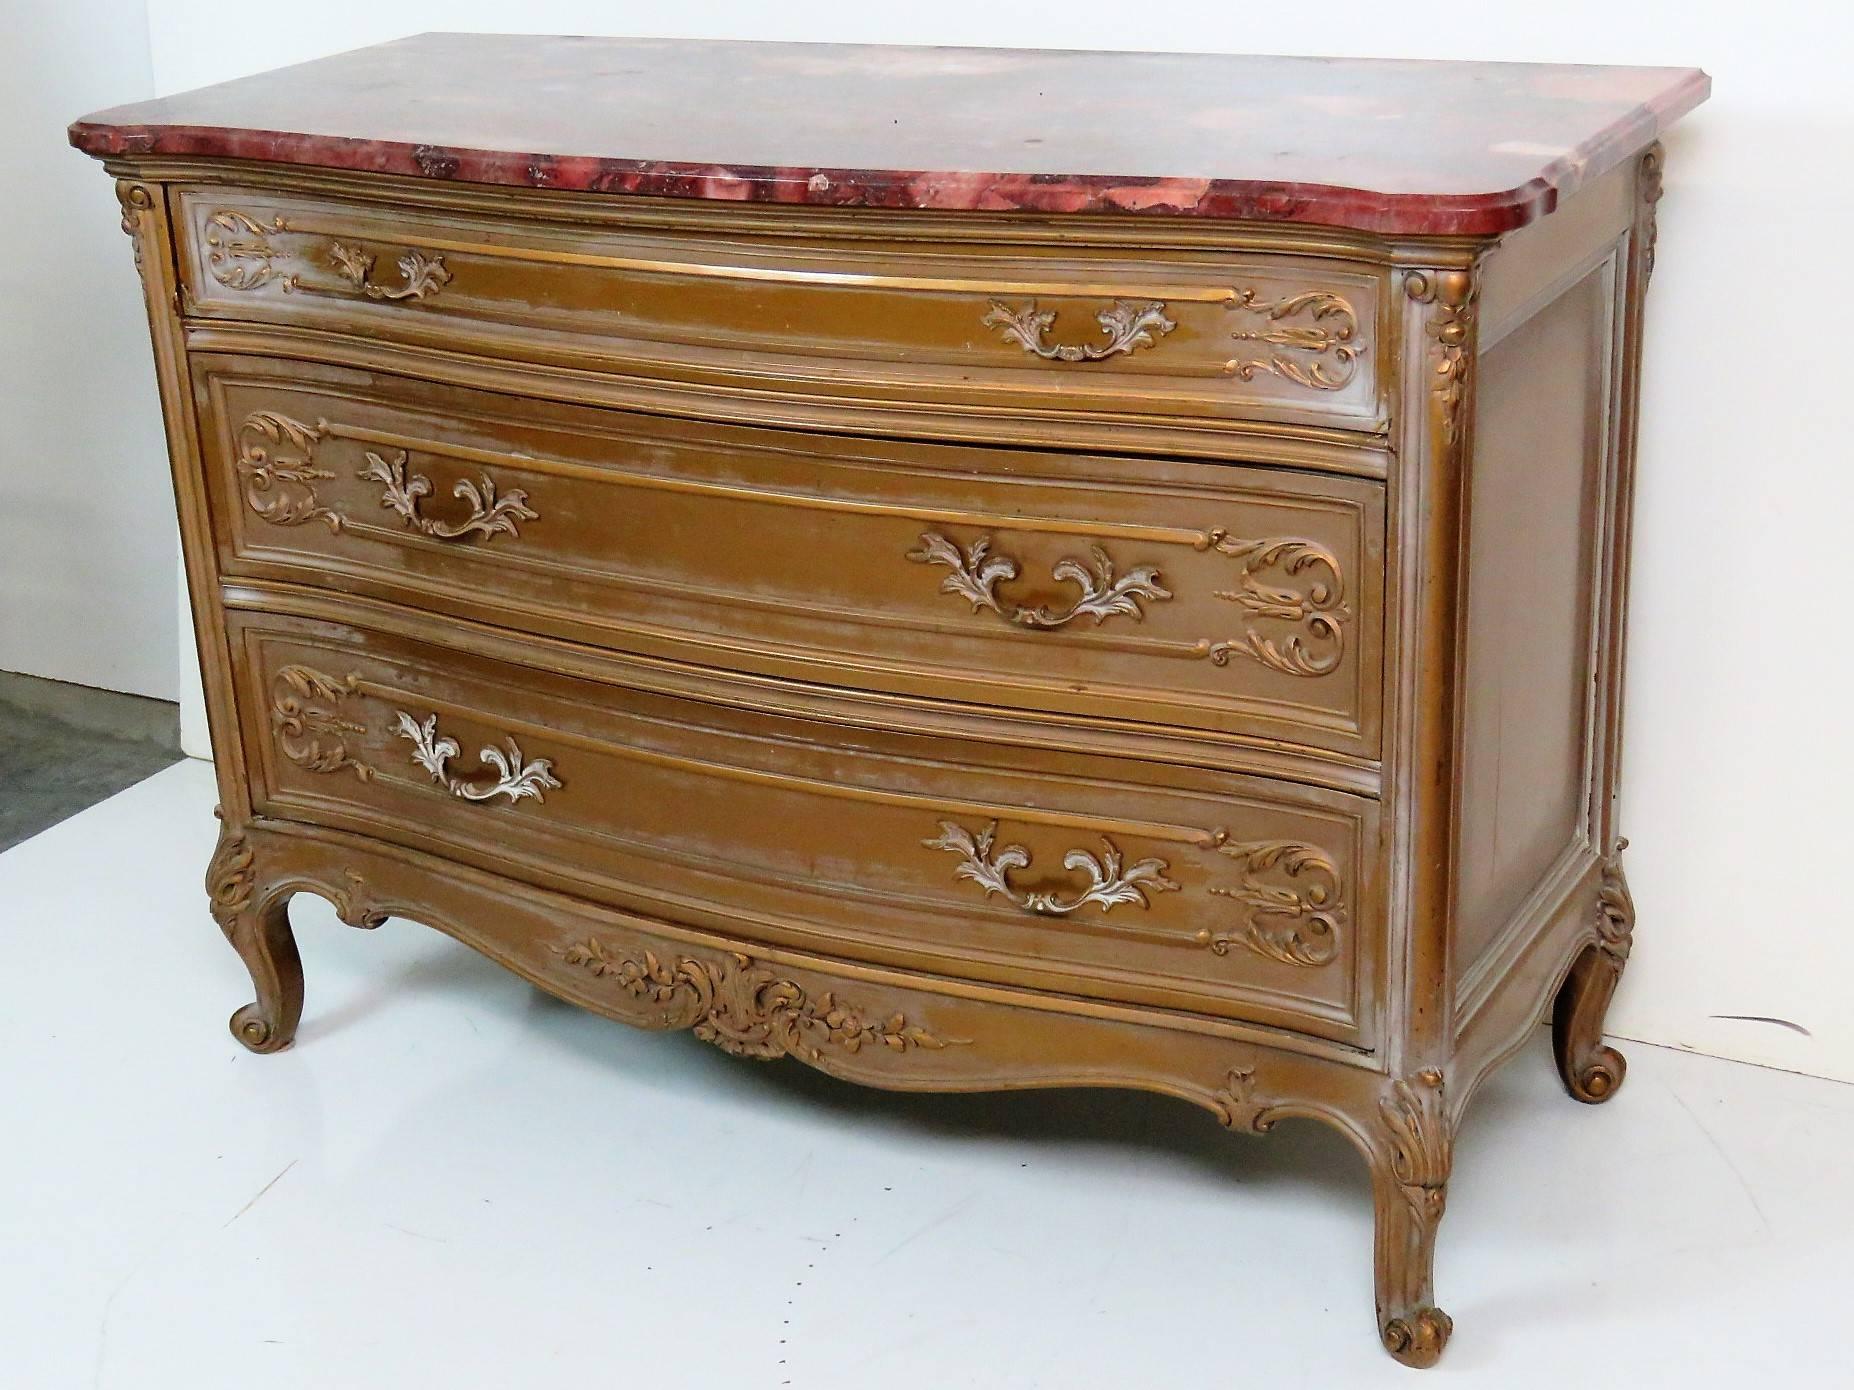 Gilt carved painted frame. Marble-top.